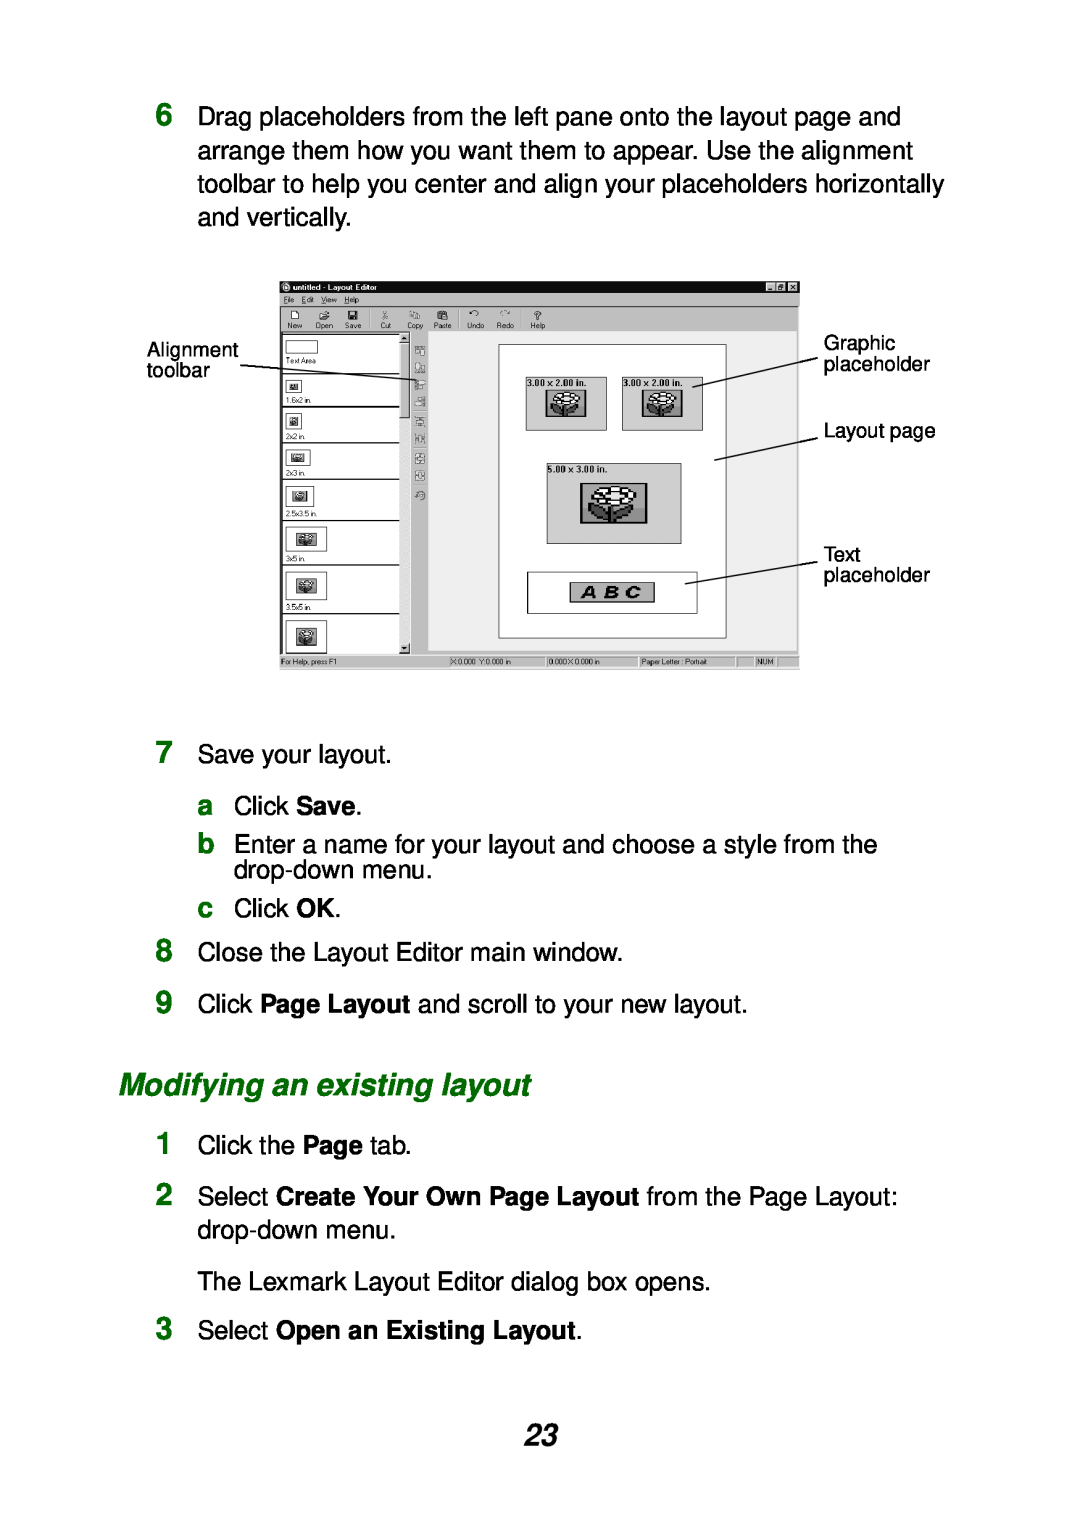 Lexmark P700 manual Modifying an existing layout, Select Open an Existing Layout 